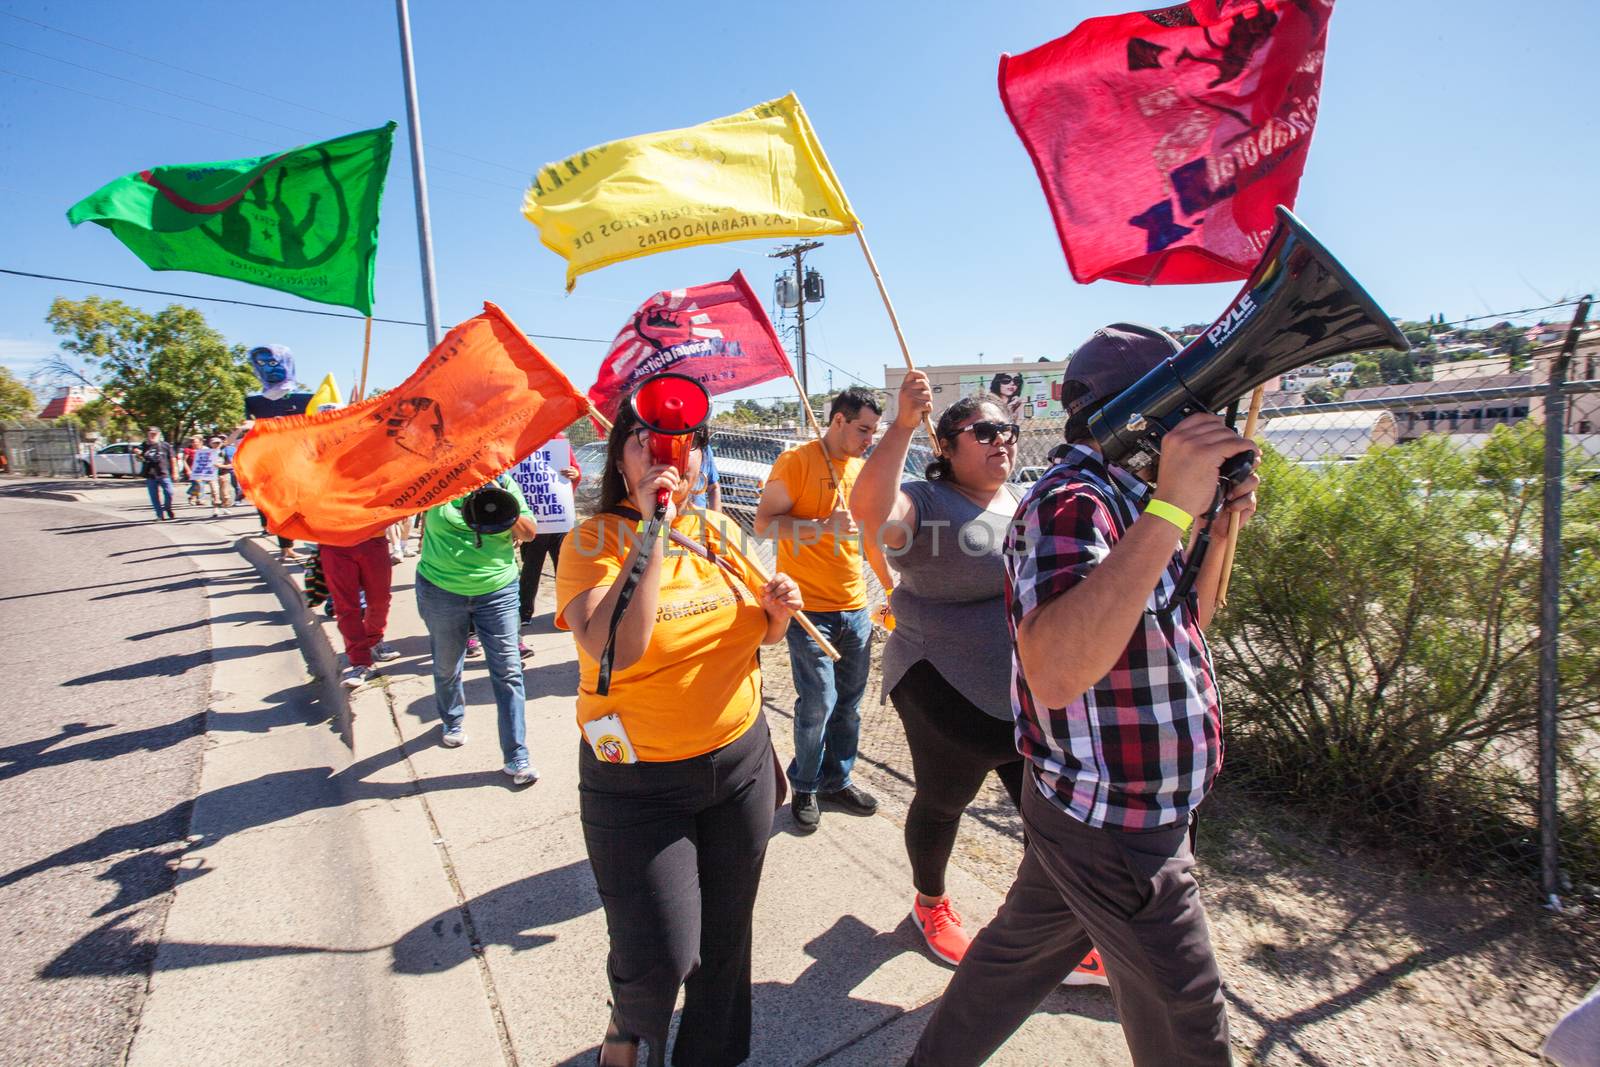 NOGALES, AZ - OCTOBER 08: Group of people on march to protest  policies at the United States and Mexico border on October 08, 2016 in Nogales, AZ, USA.